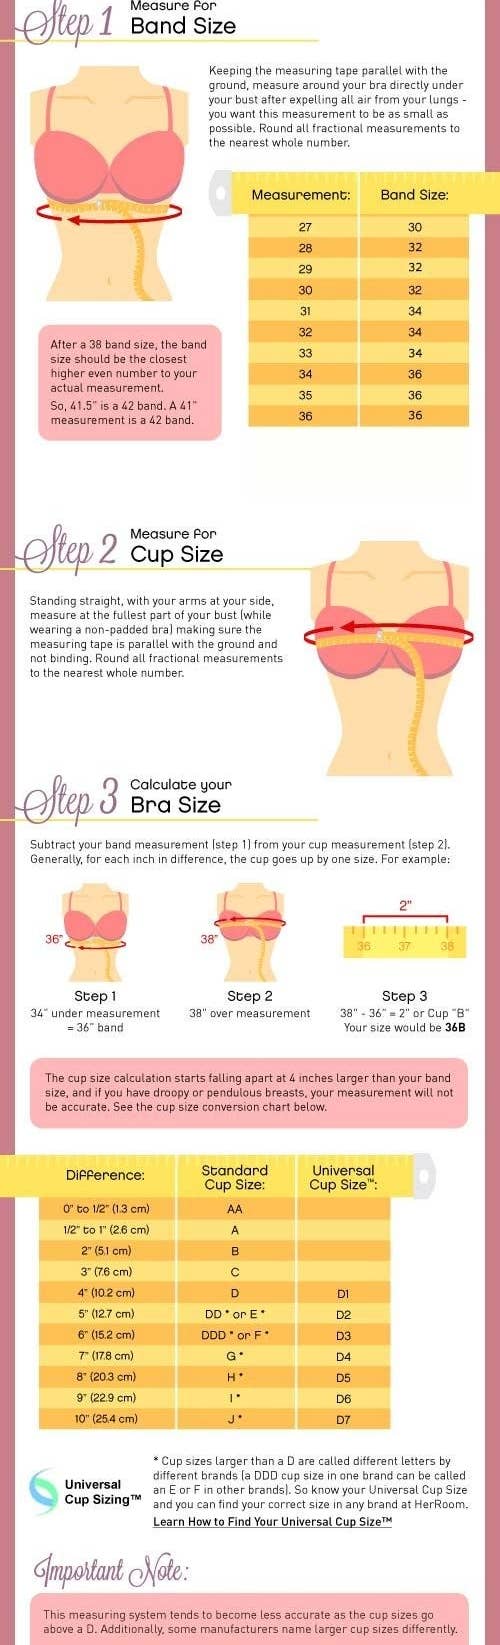 Find Your Perfect Fit: A Guide to Measuring Your Bra Size